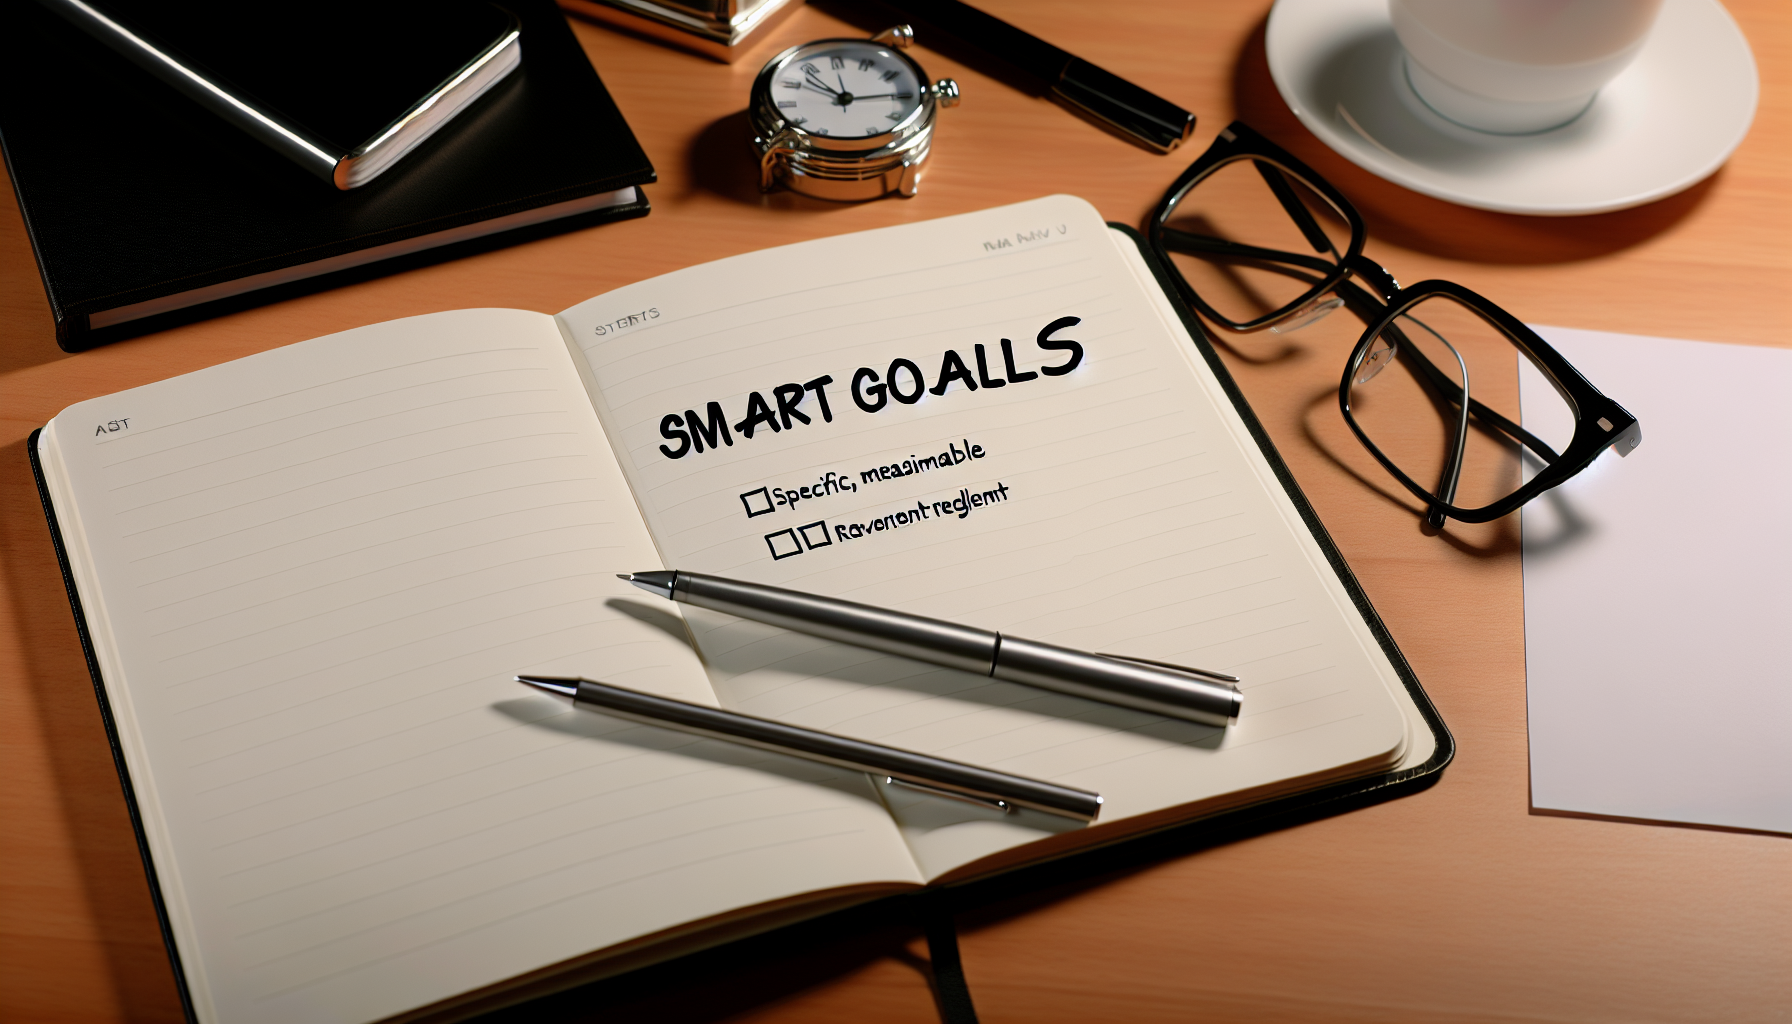 A notebook with 'SMART goals' written on it, representing goal setting in personal development